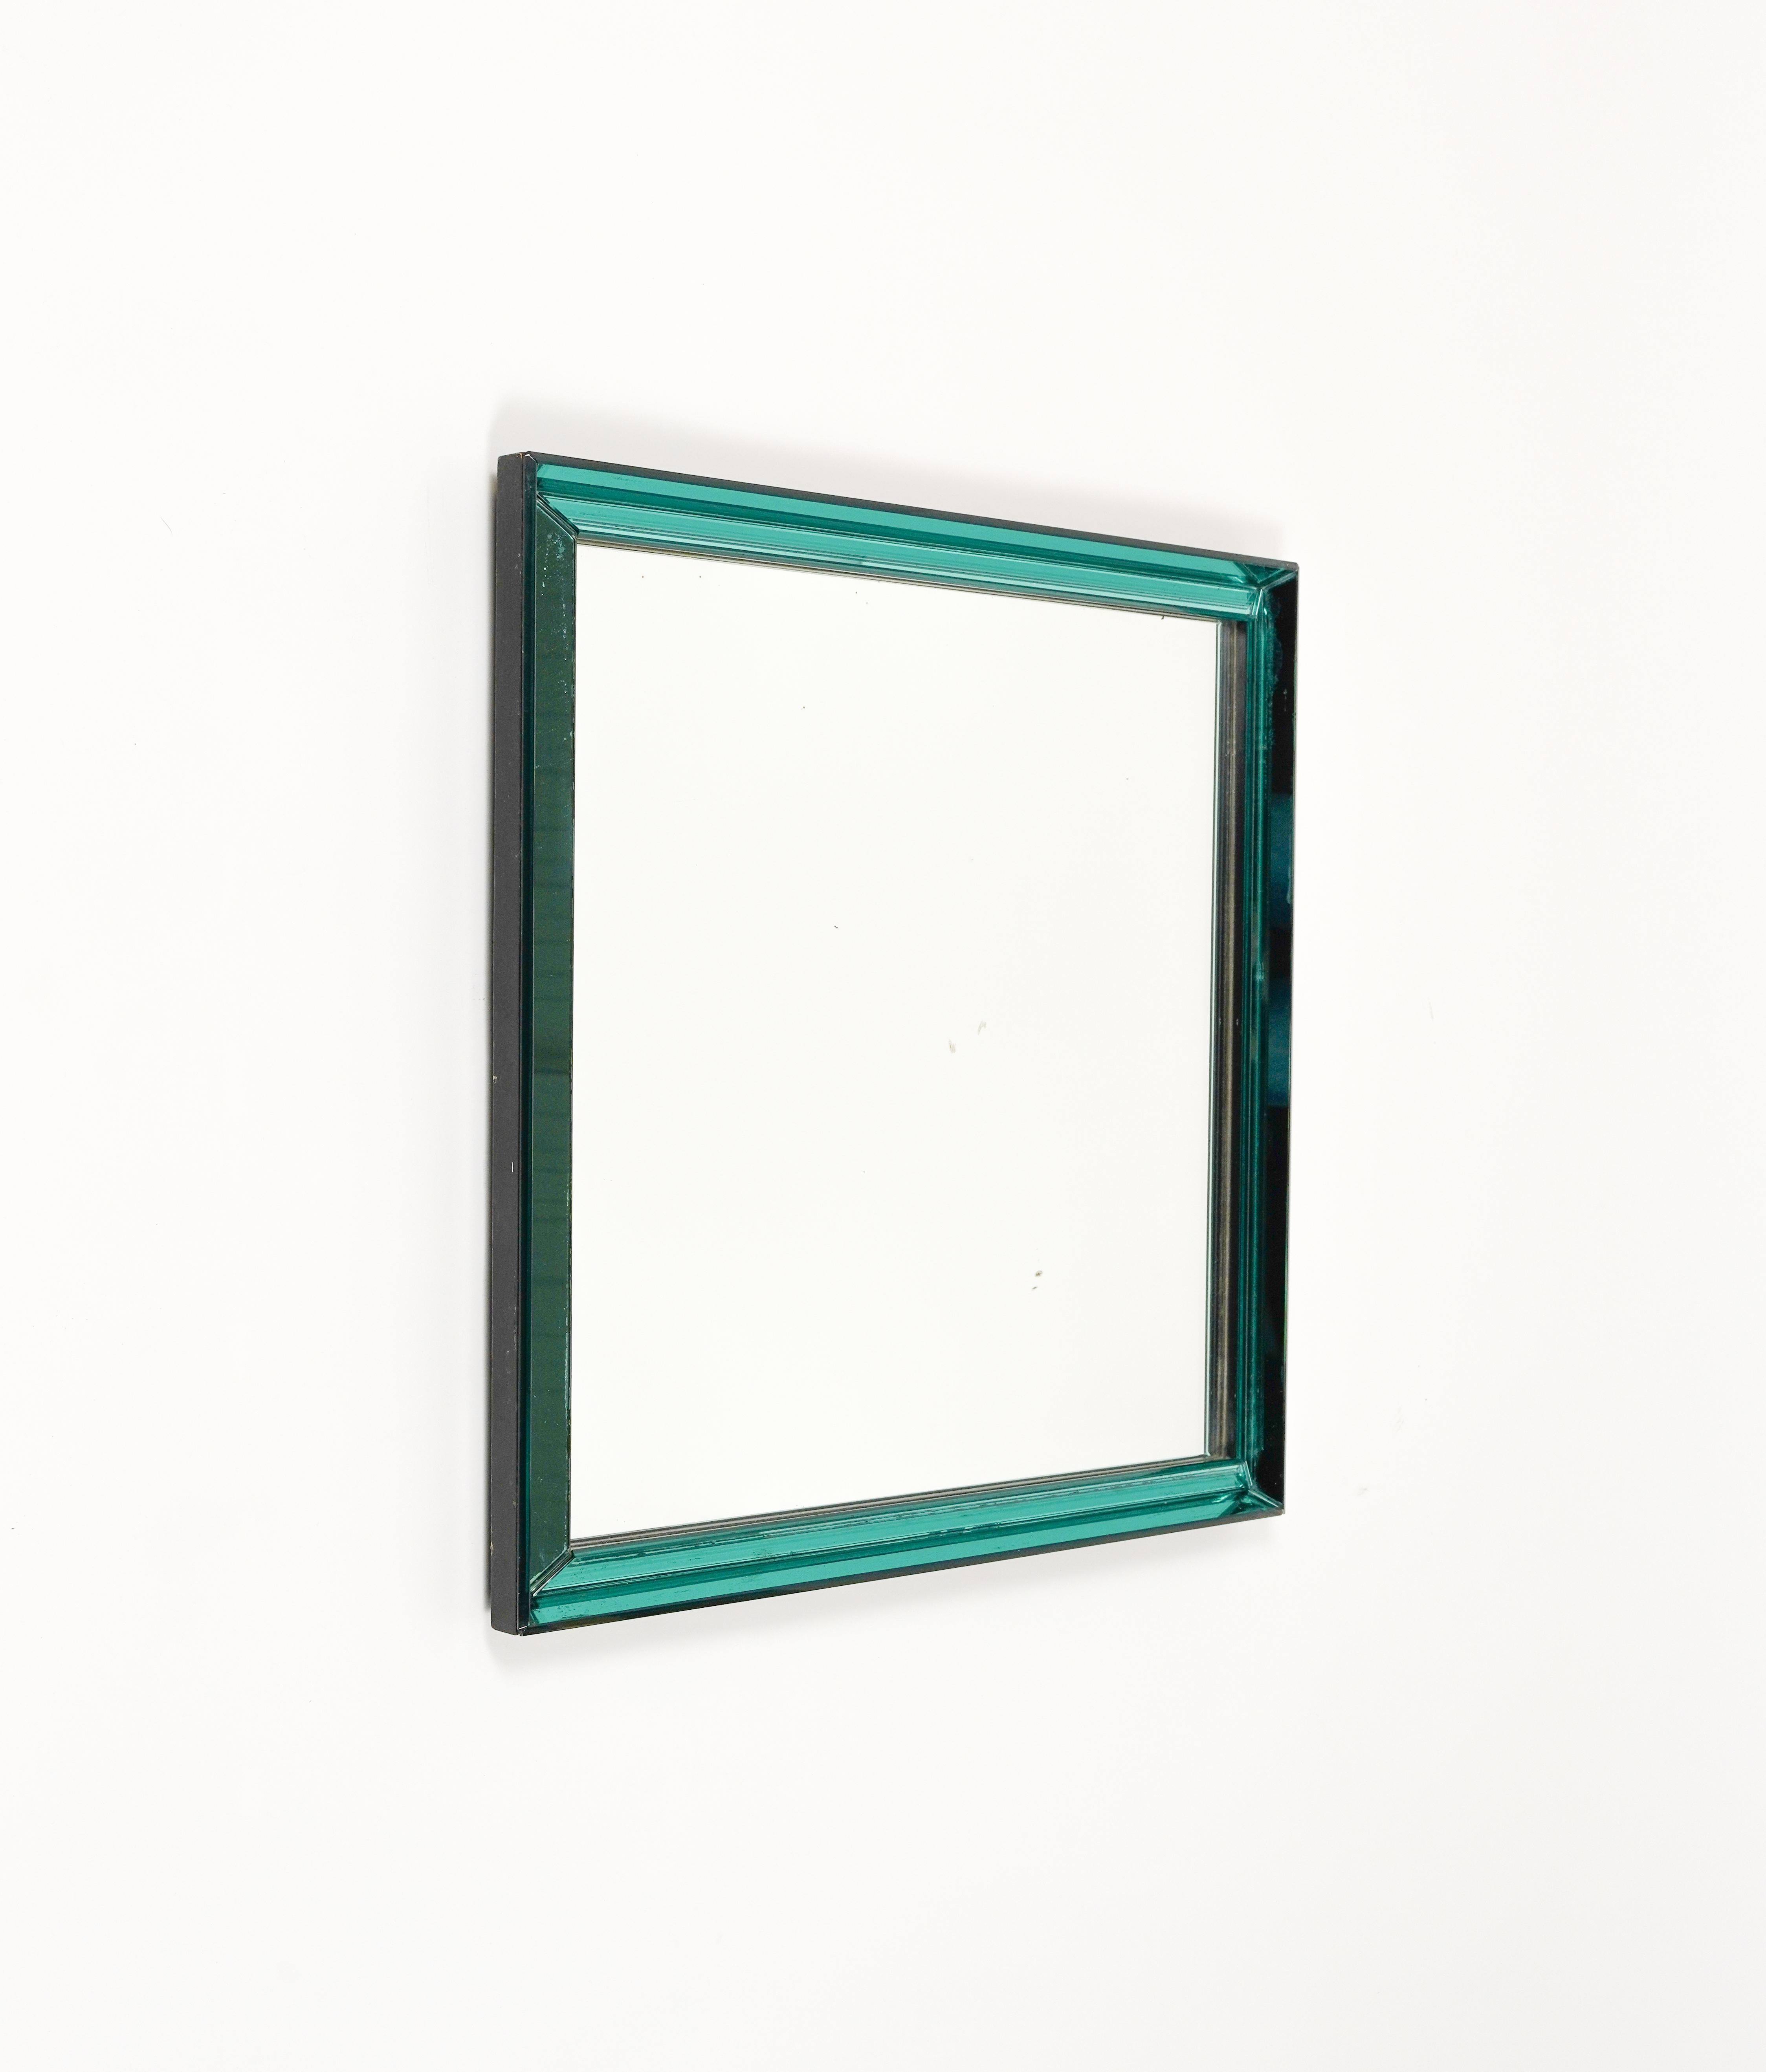 Mid-Century Modern Midcentury Squared Wall Mirror by Max Ingrand for Fontana Arte, Italy 1960s For Sale